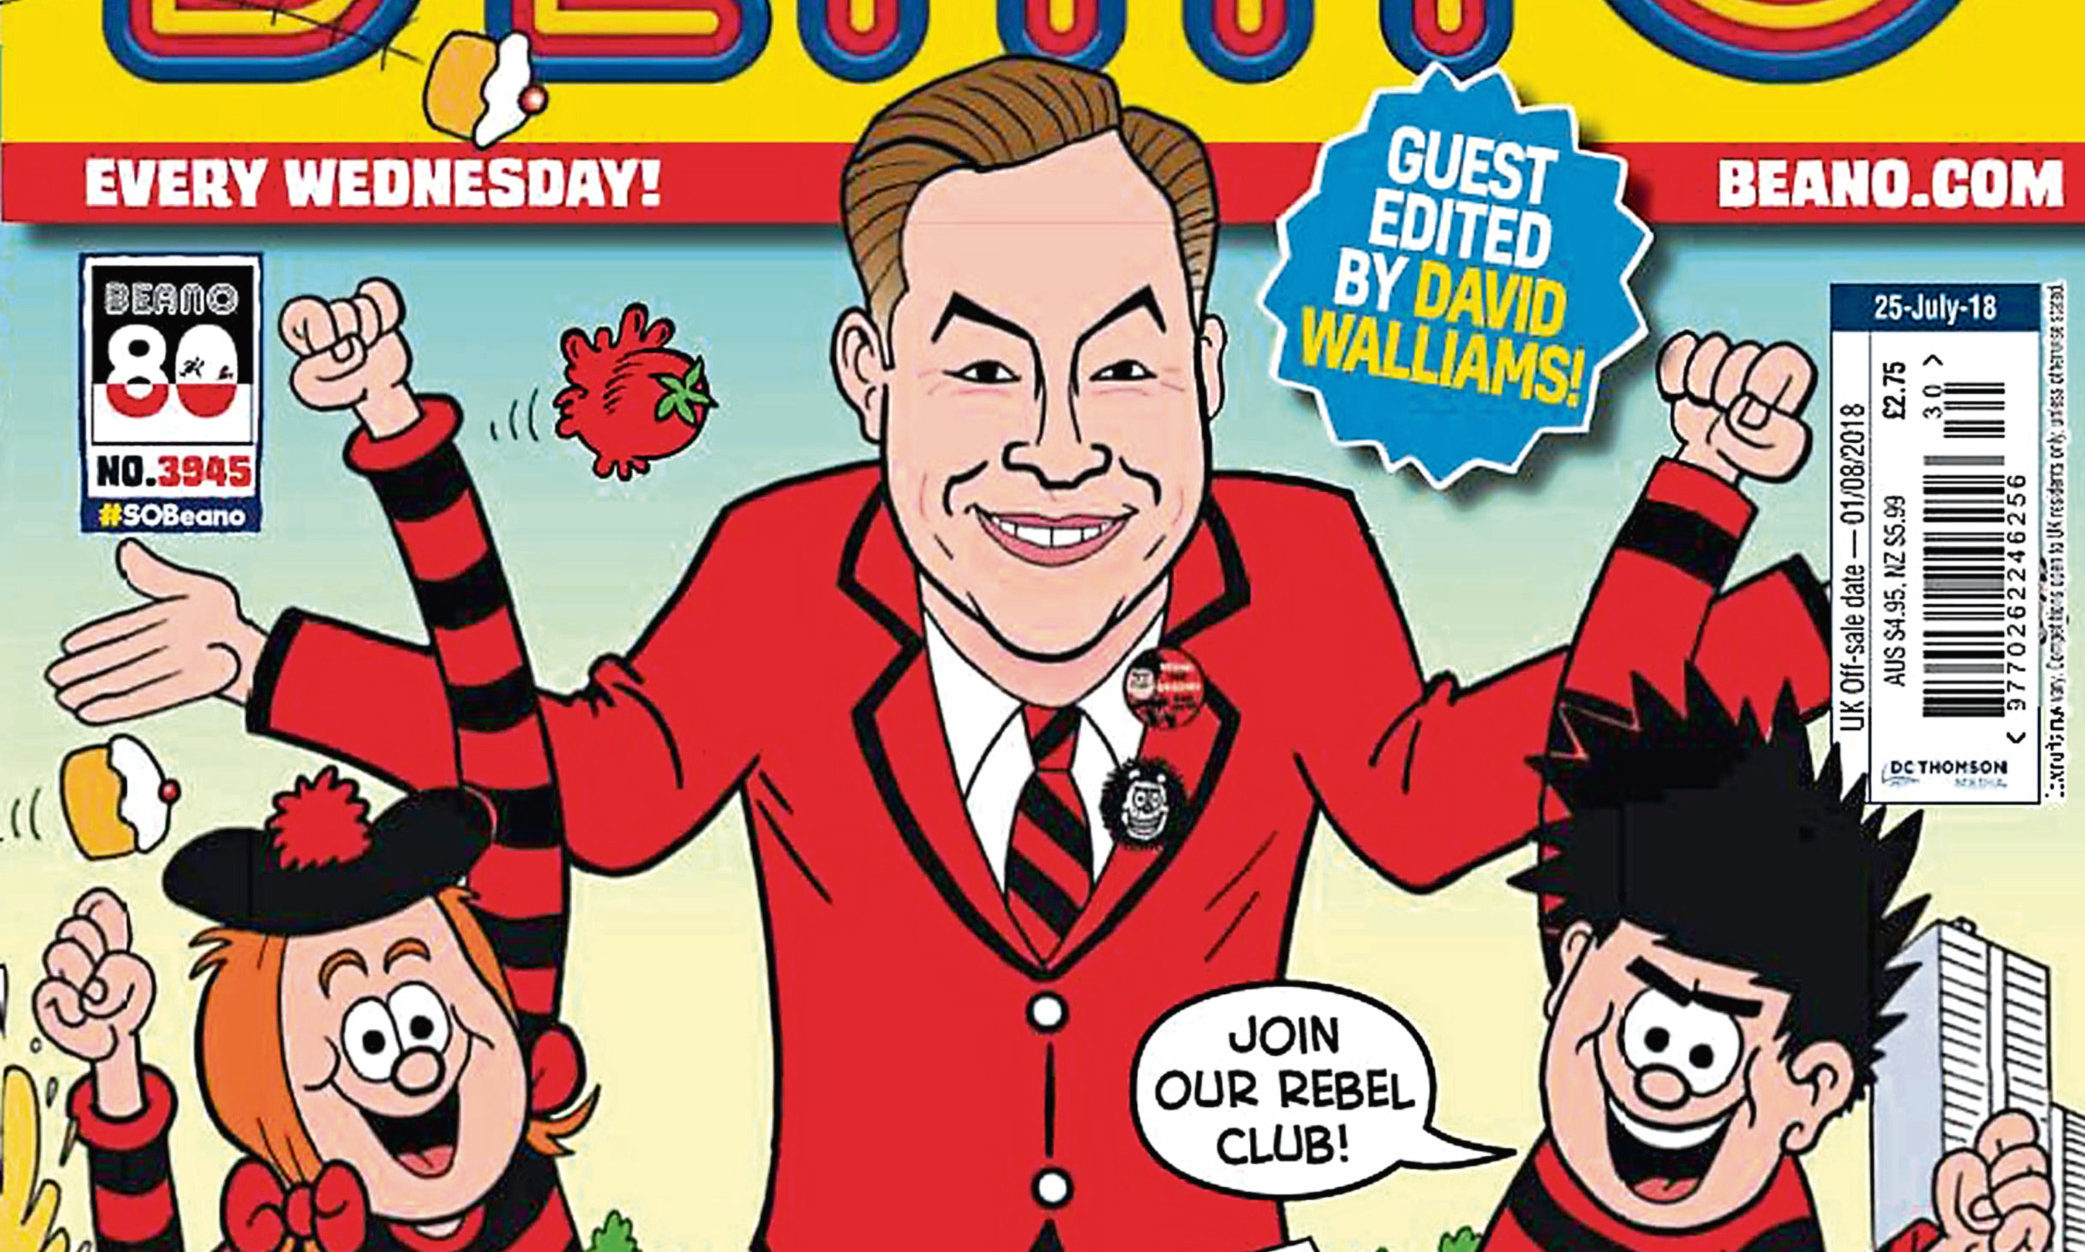 The front cover of the Beano which David Walliams will guest edit.